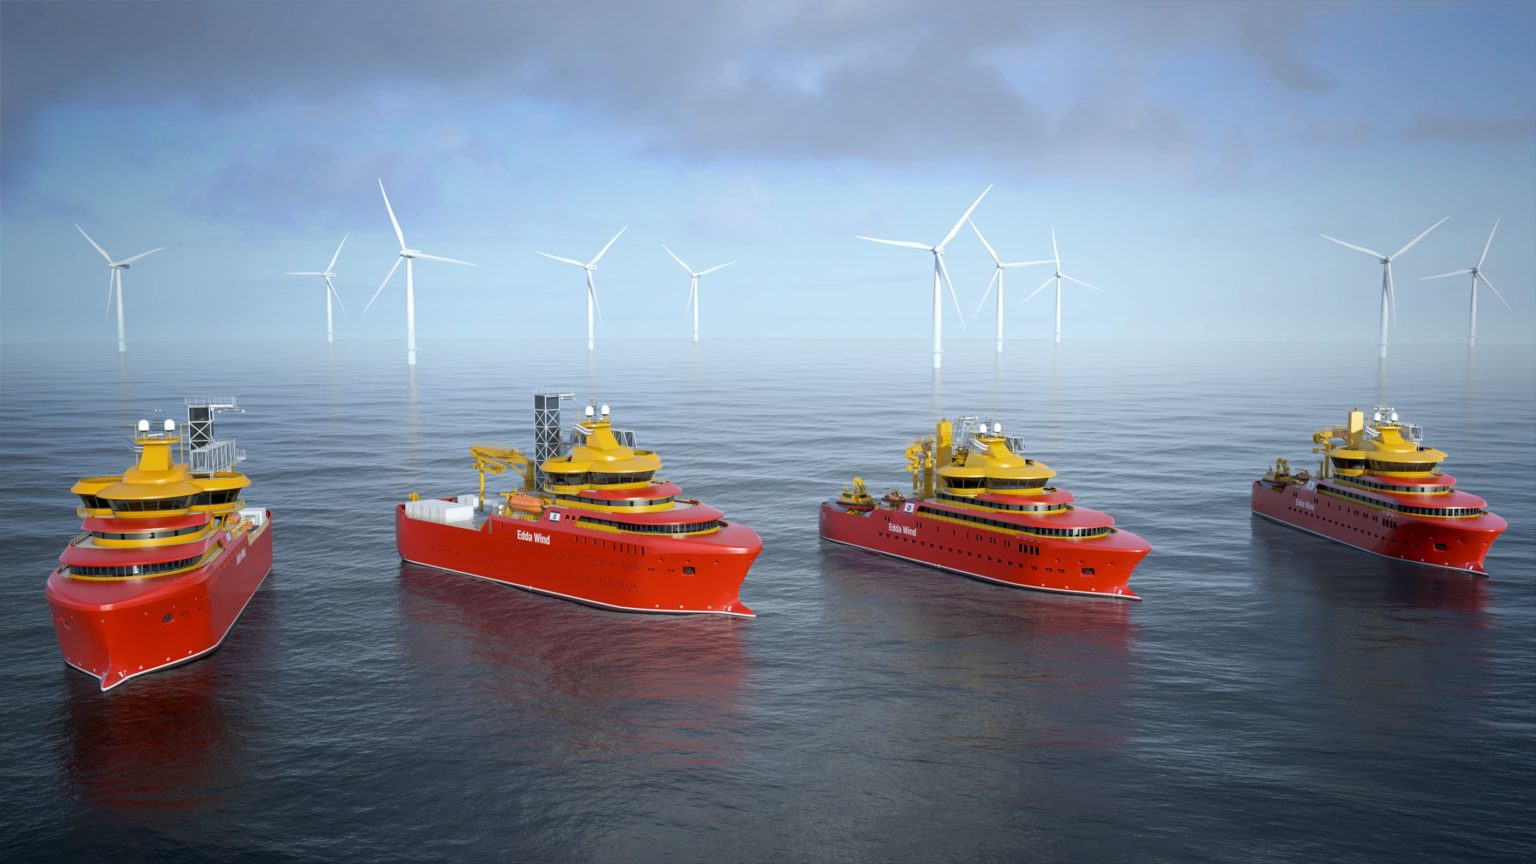 An image rendering Edda Wind's four newbuild vessels next to offshore wind turbines